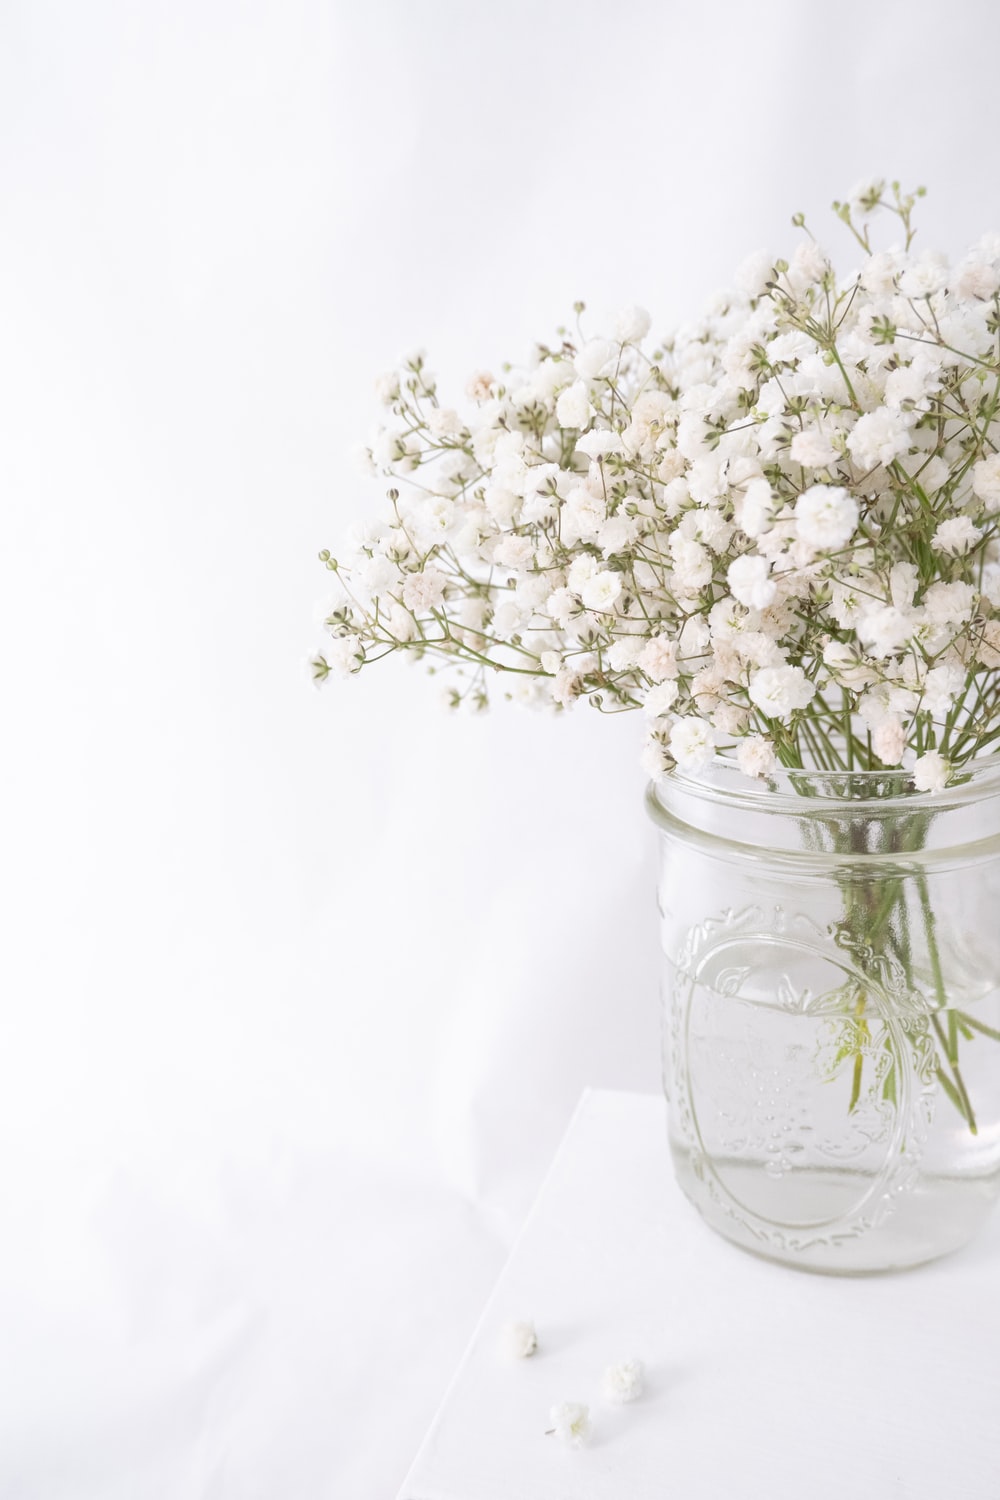 White Flower Picture. Download Free Image